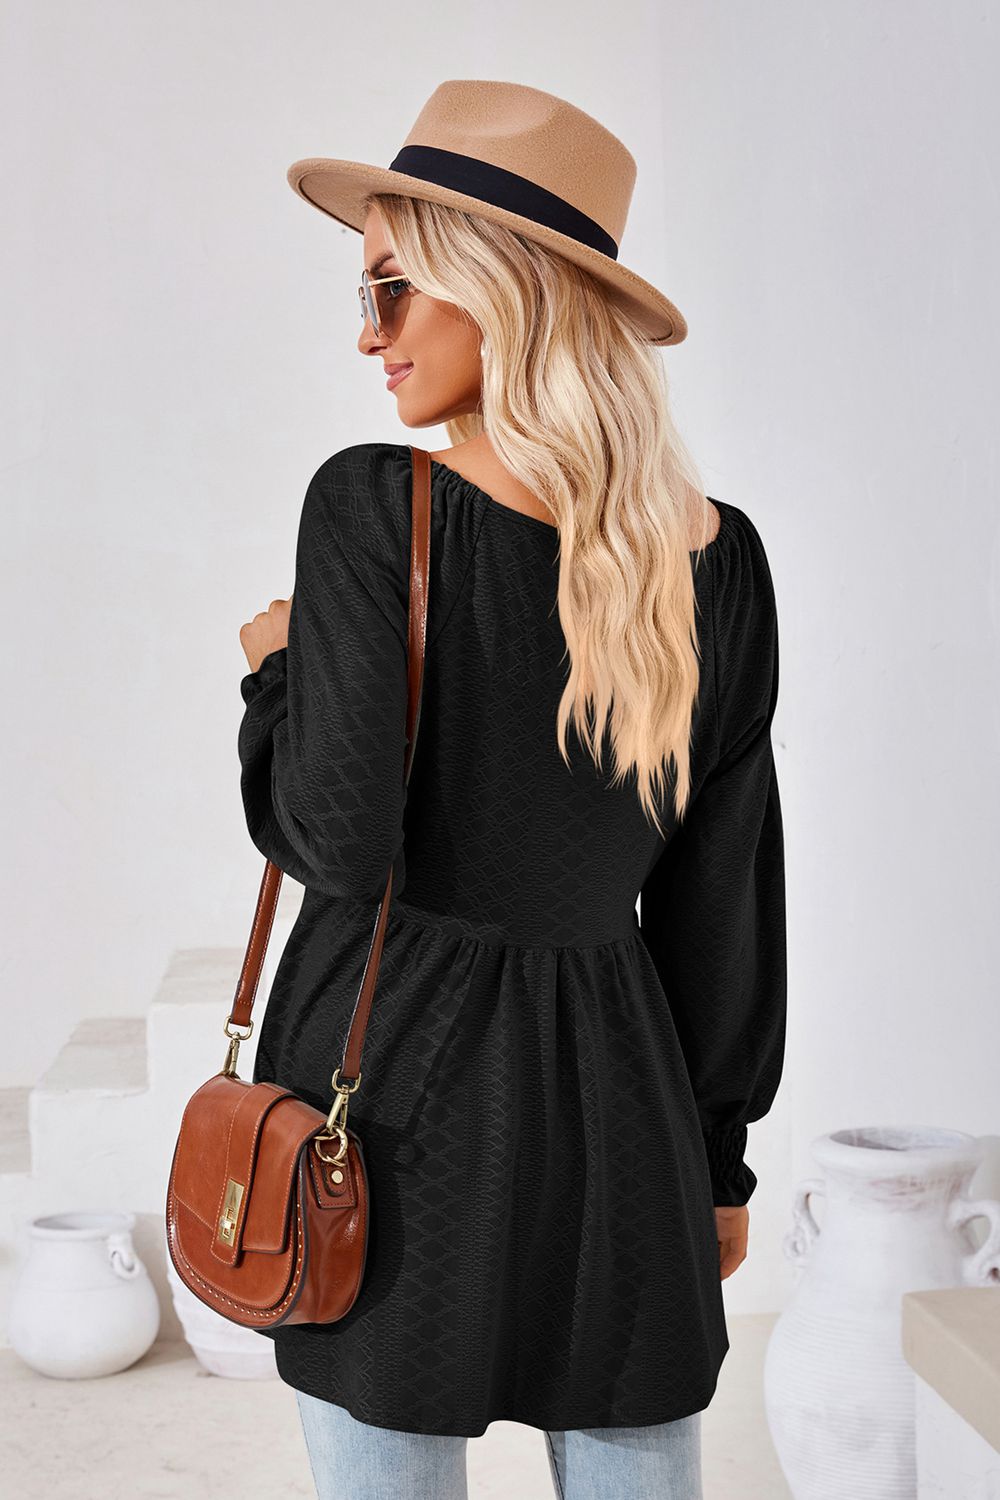 V-Neck Lantern Sleeve Blouse - Women’s Clothing & Accessories - Shirts & Tops - 21 - 2024